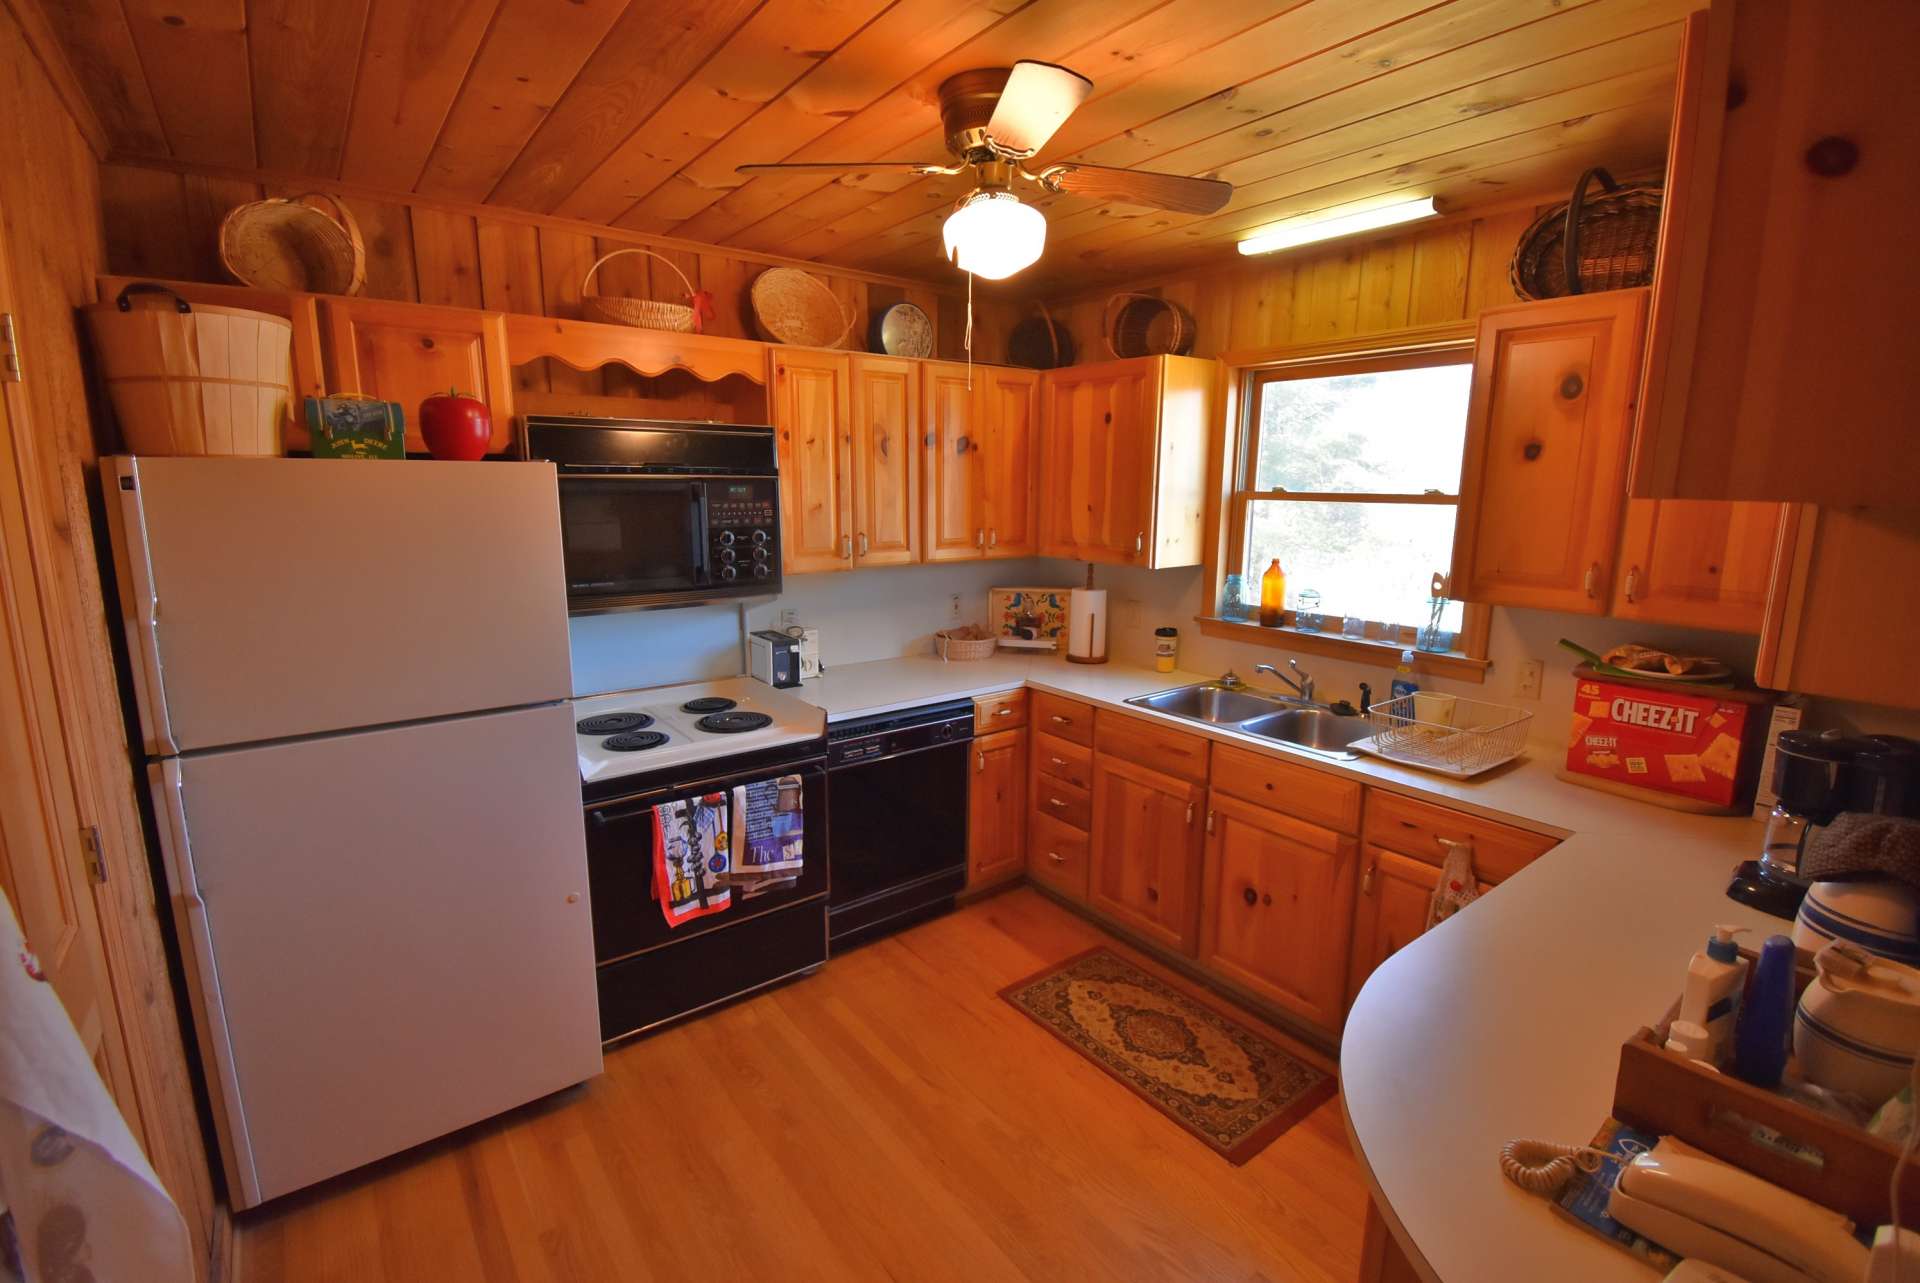 The kitchen offers plenty of work and storage space.